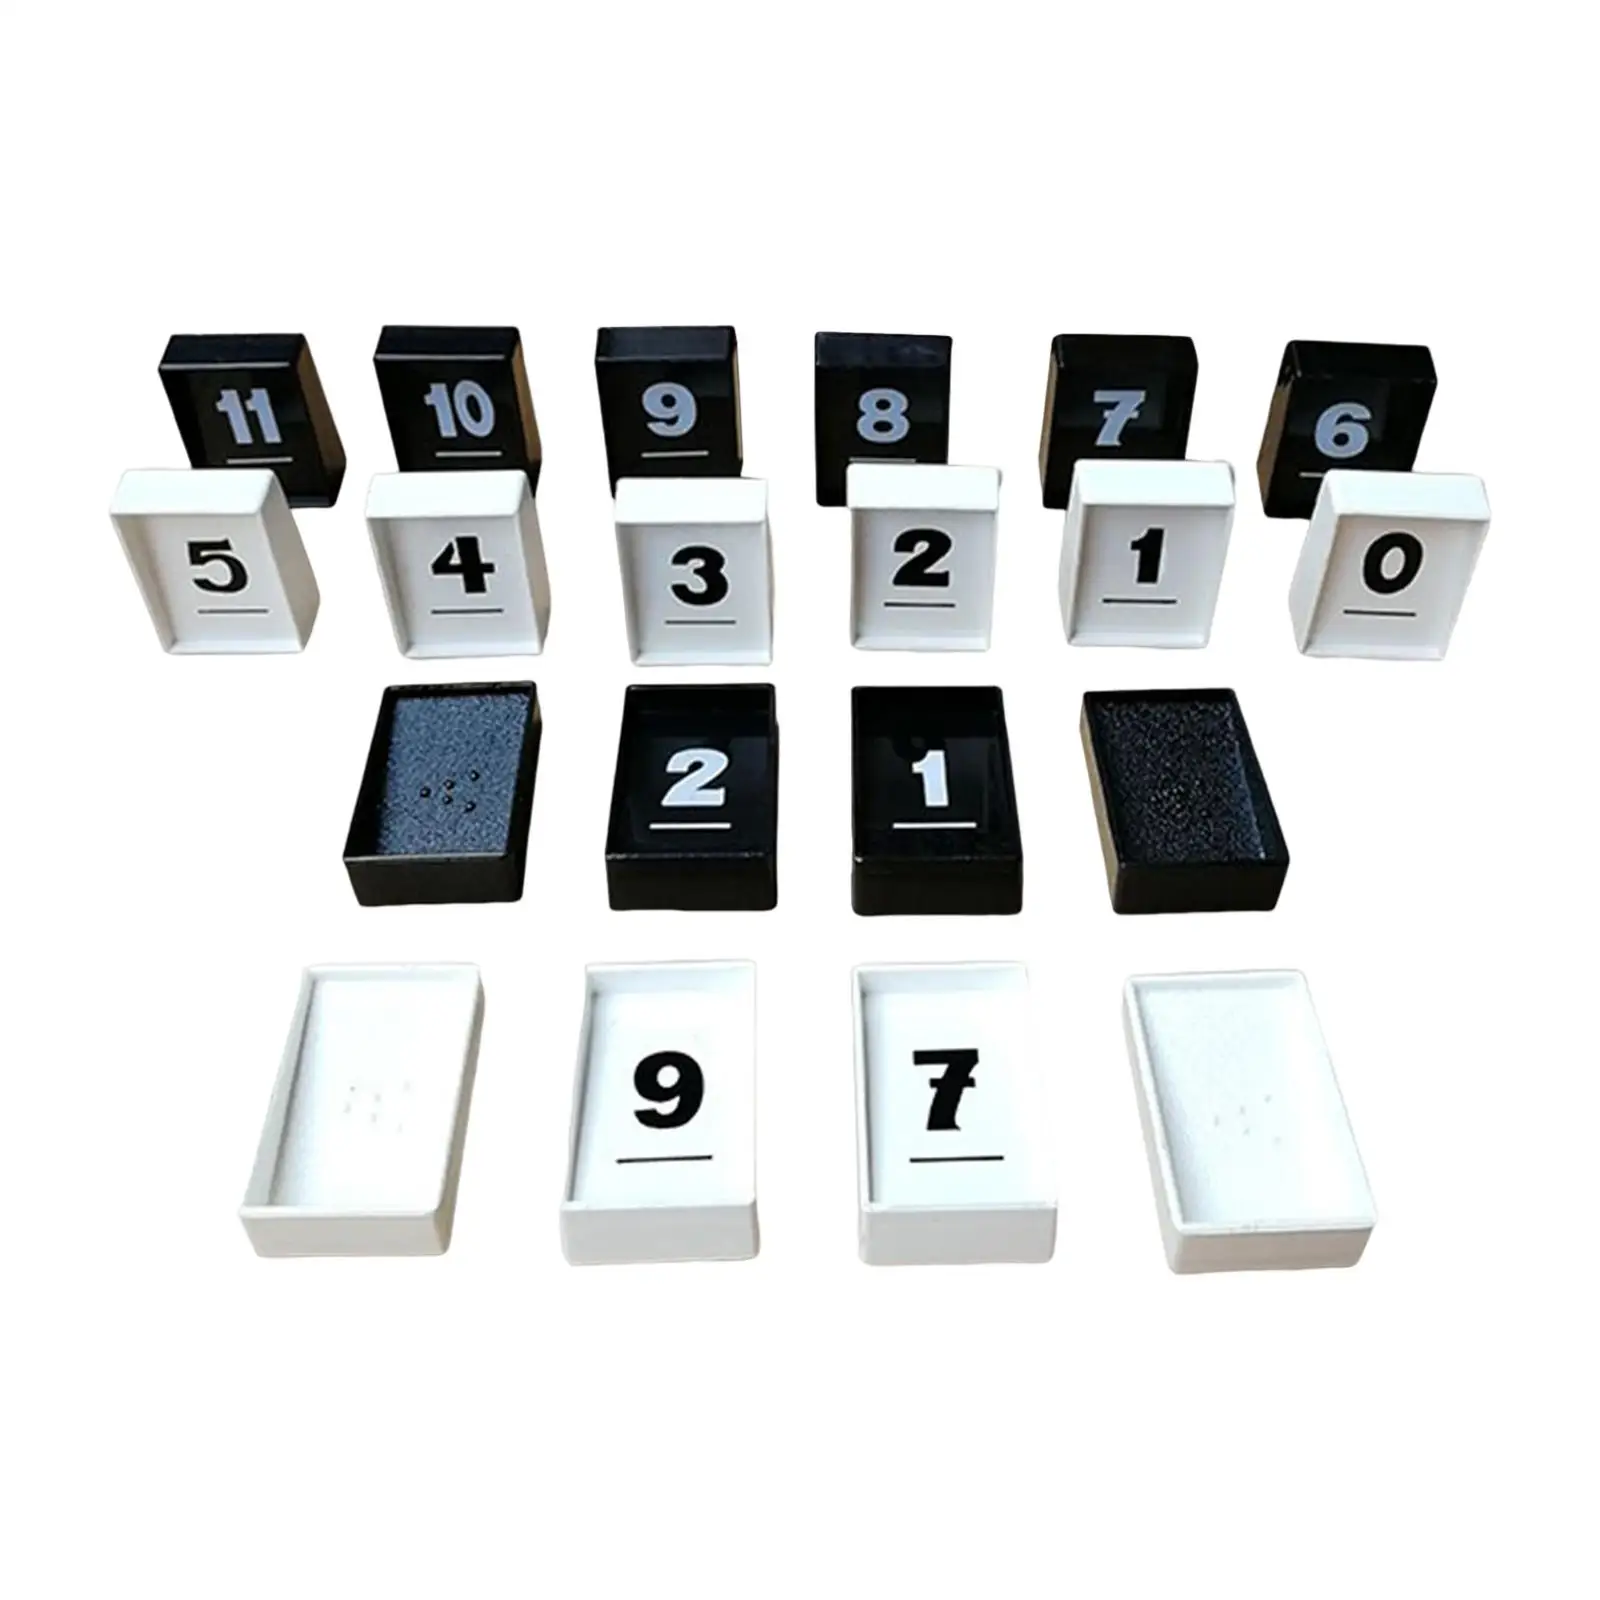 Traditional Number Board Game Password Game 24 Tiles for Friend 2-4 Player Desktop Game Entertainment Party Favors